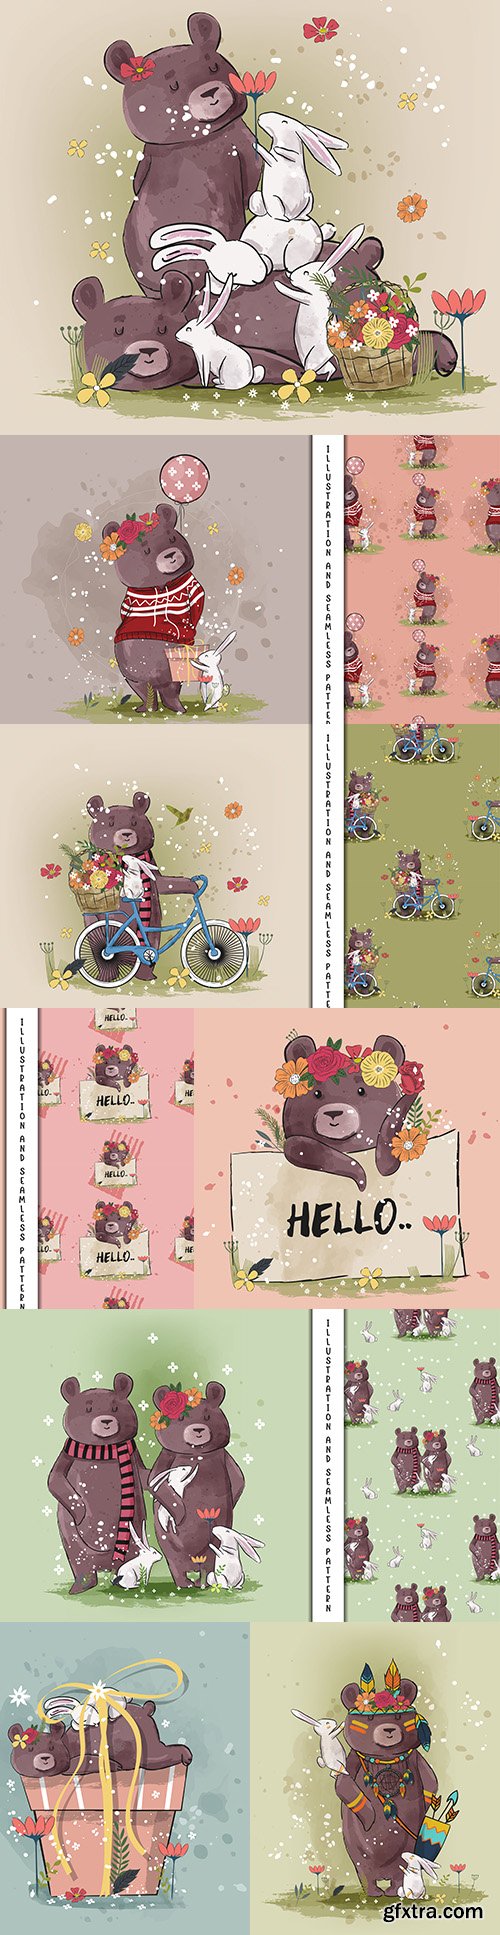 Bear with rabbits and flowers decorative poster design